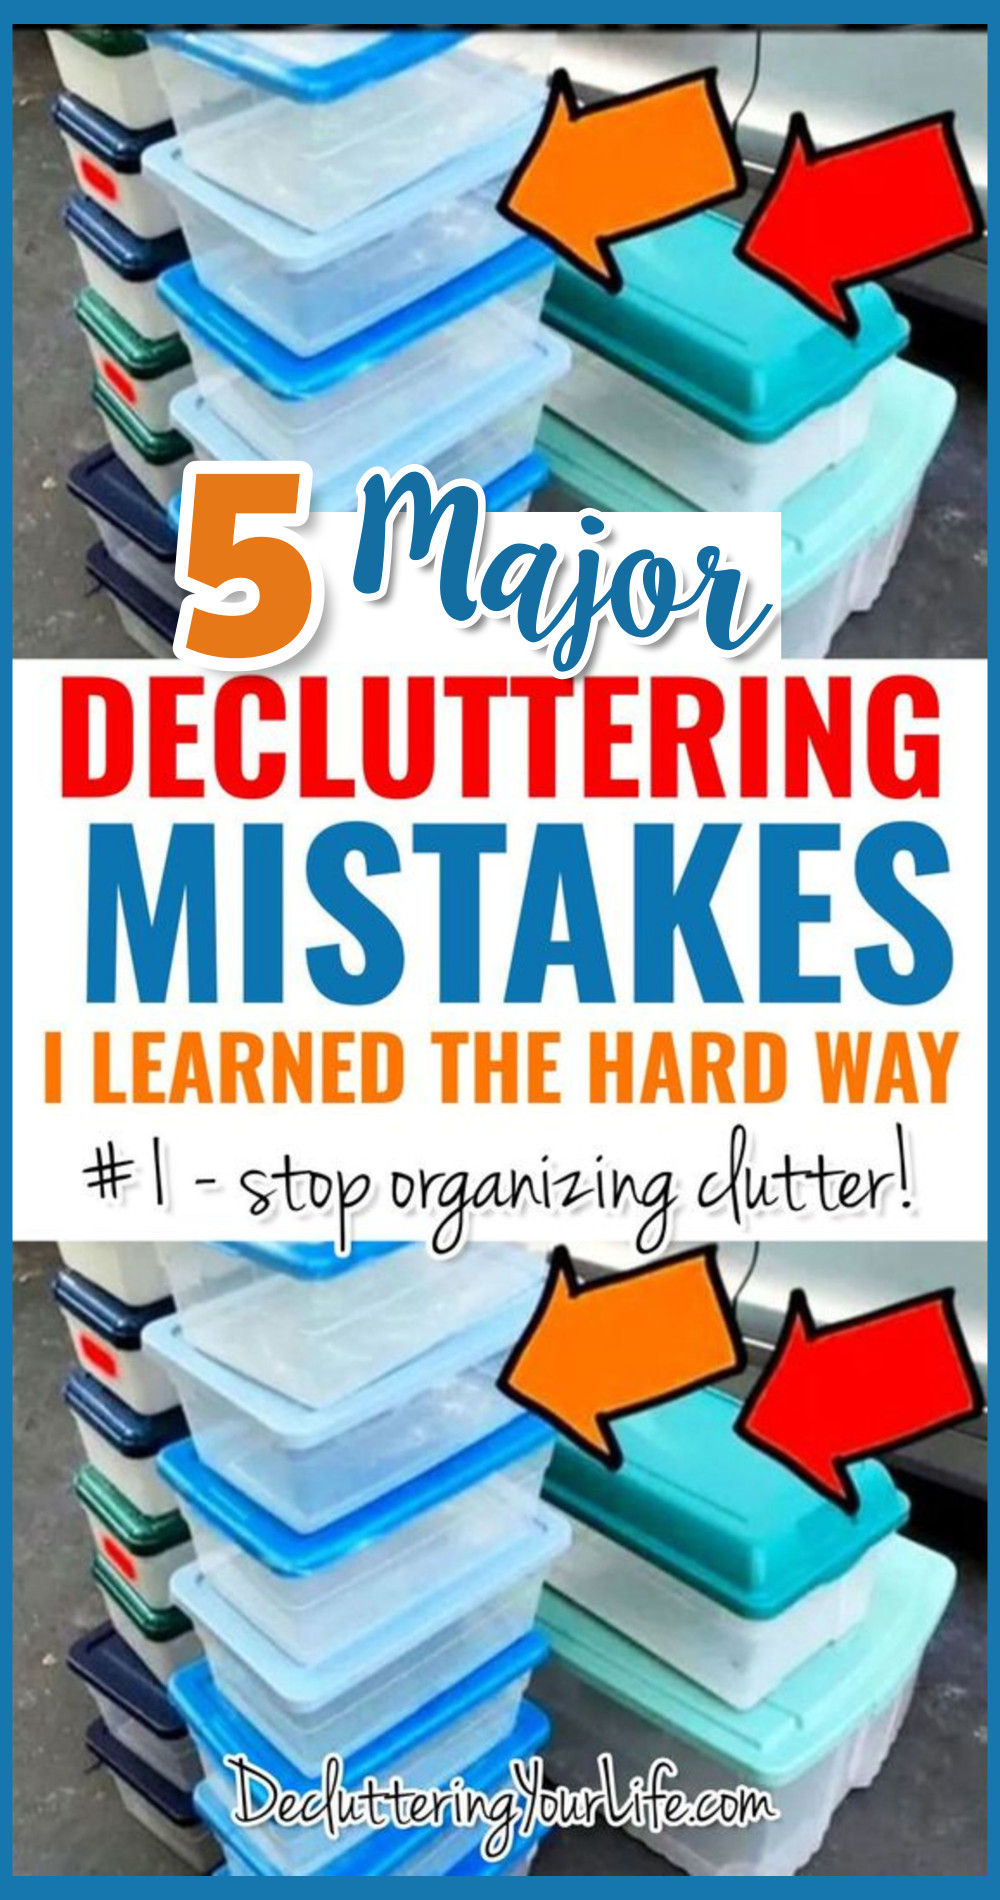 5 major decluttering mistakes I learned the hard way